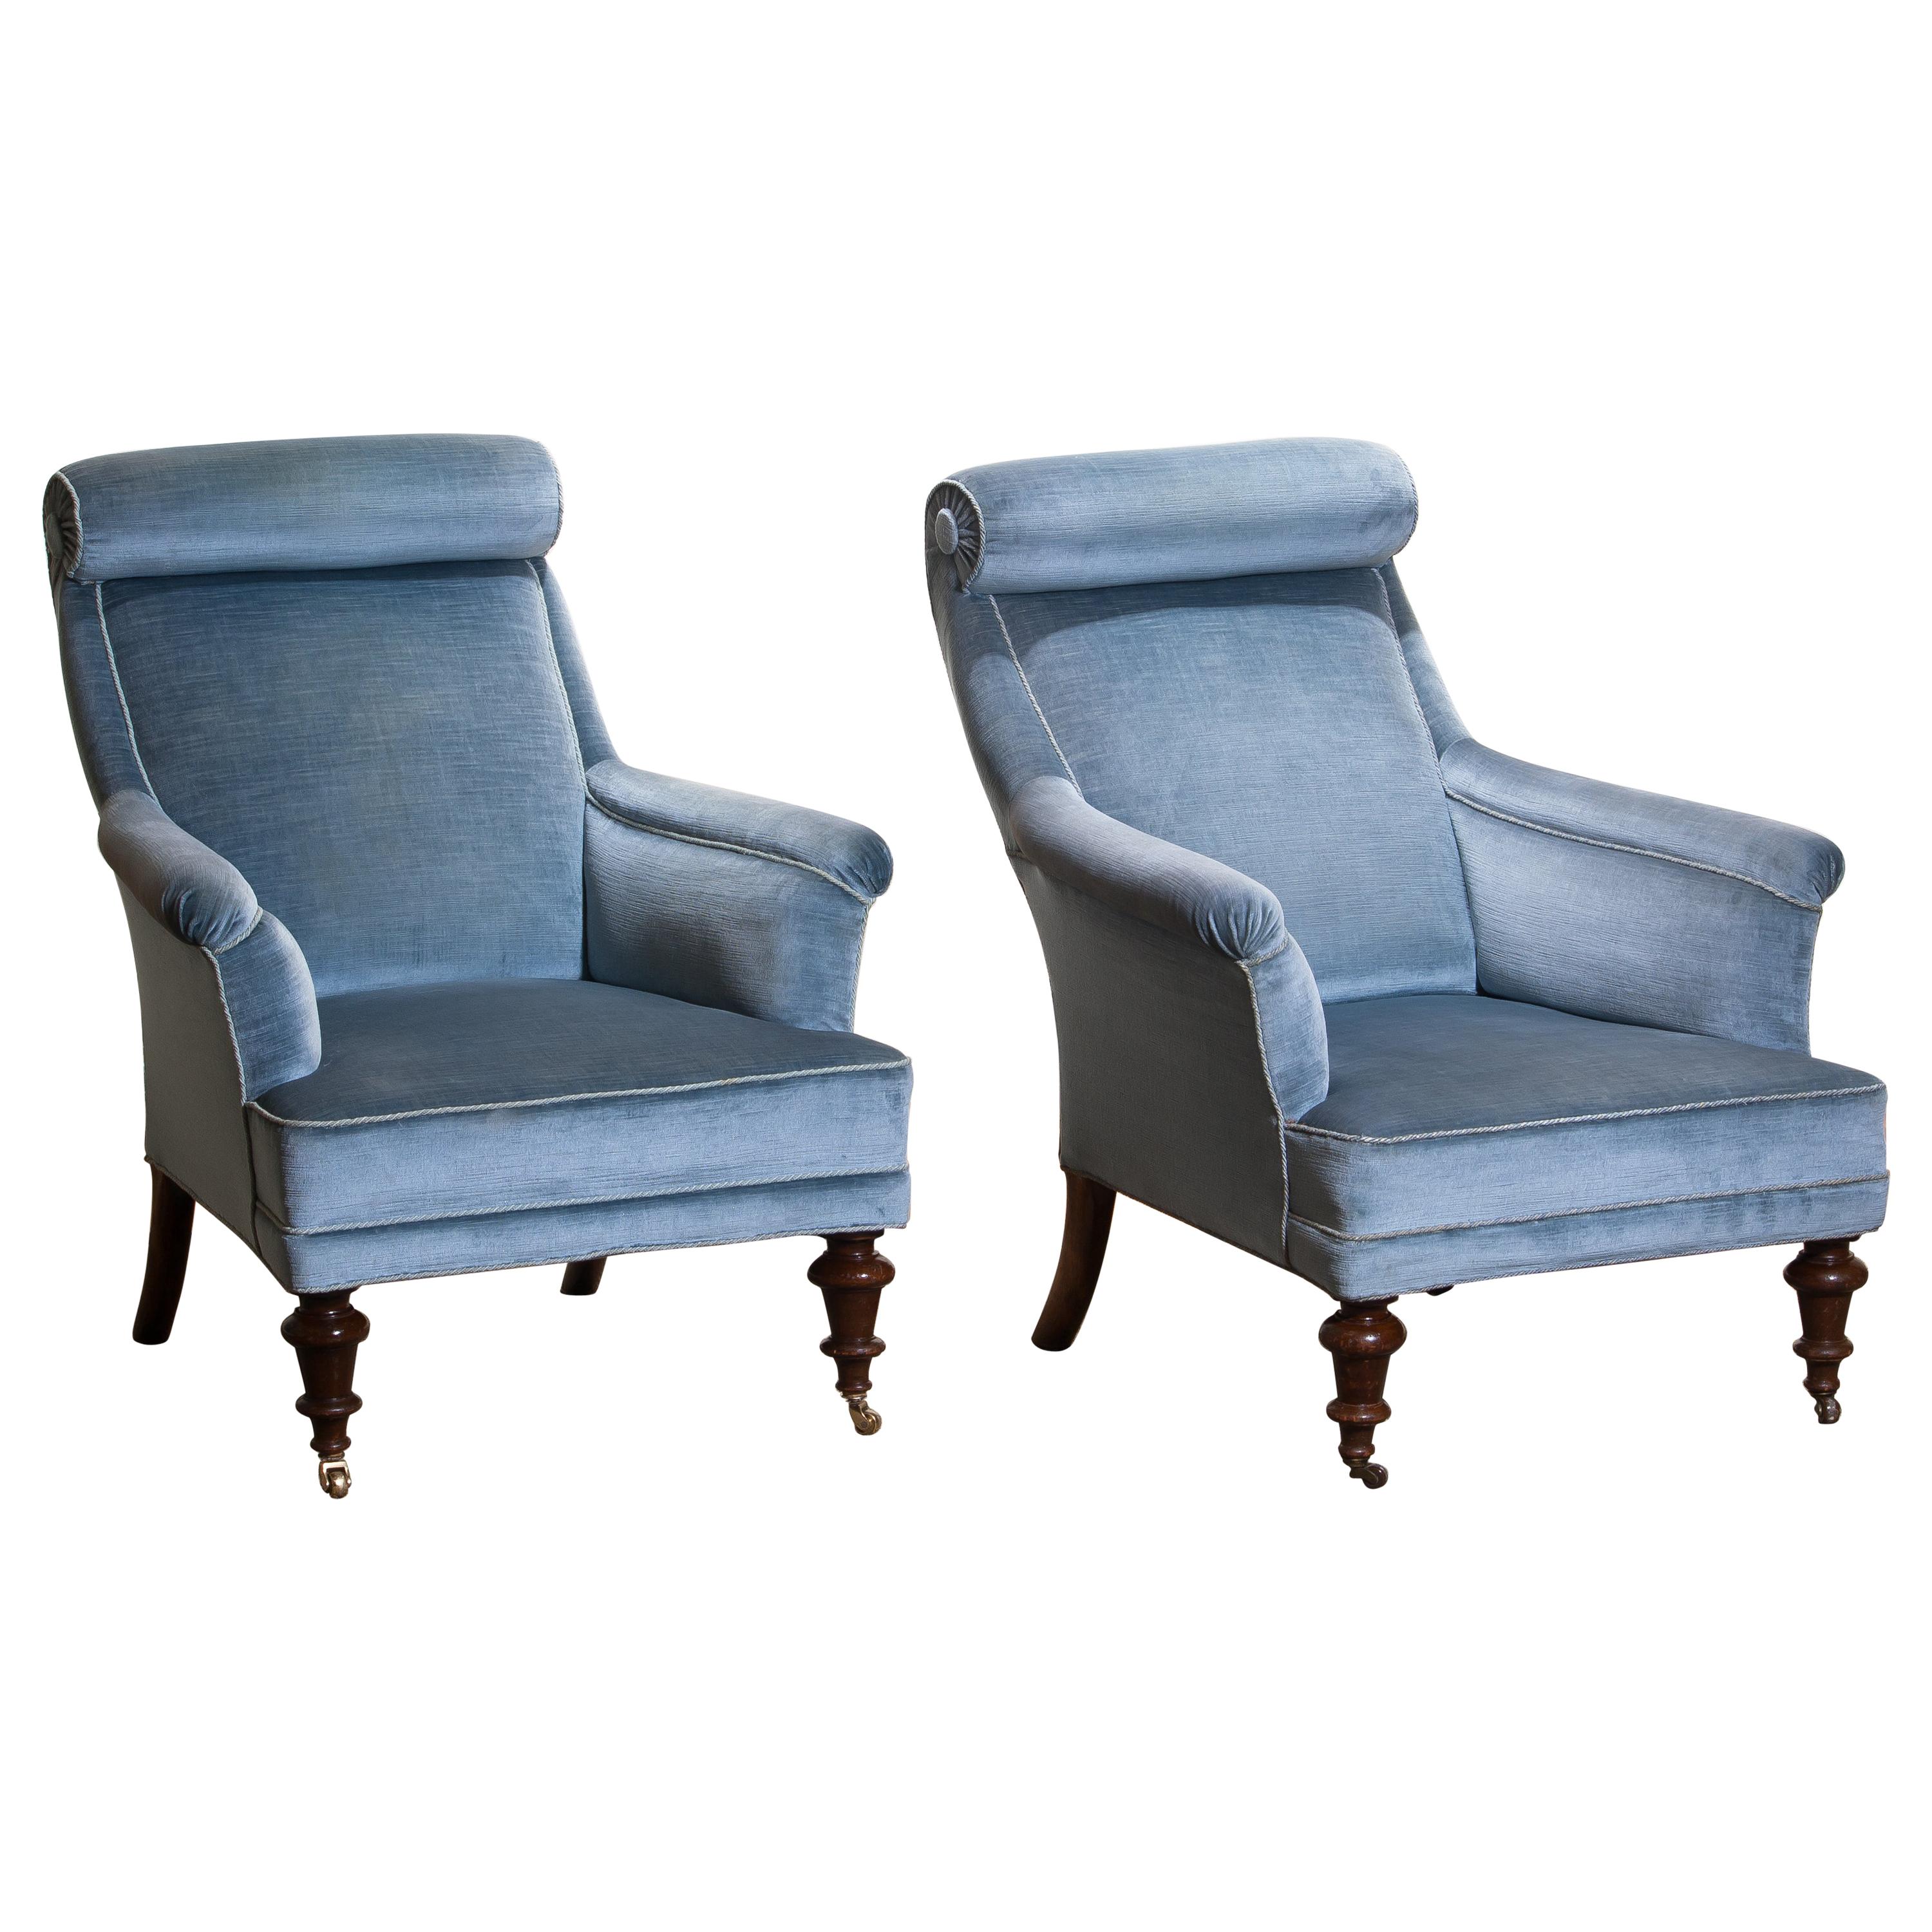 American Classical 1900s Set of Two Ice Blue Velvet Dorothy Draper Style Bergère / Lounge Chairs